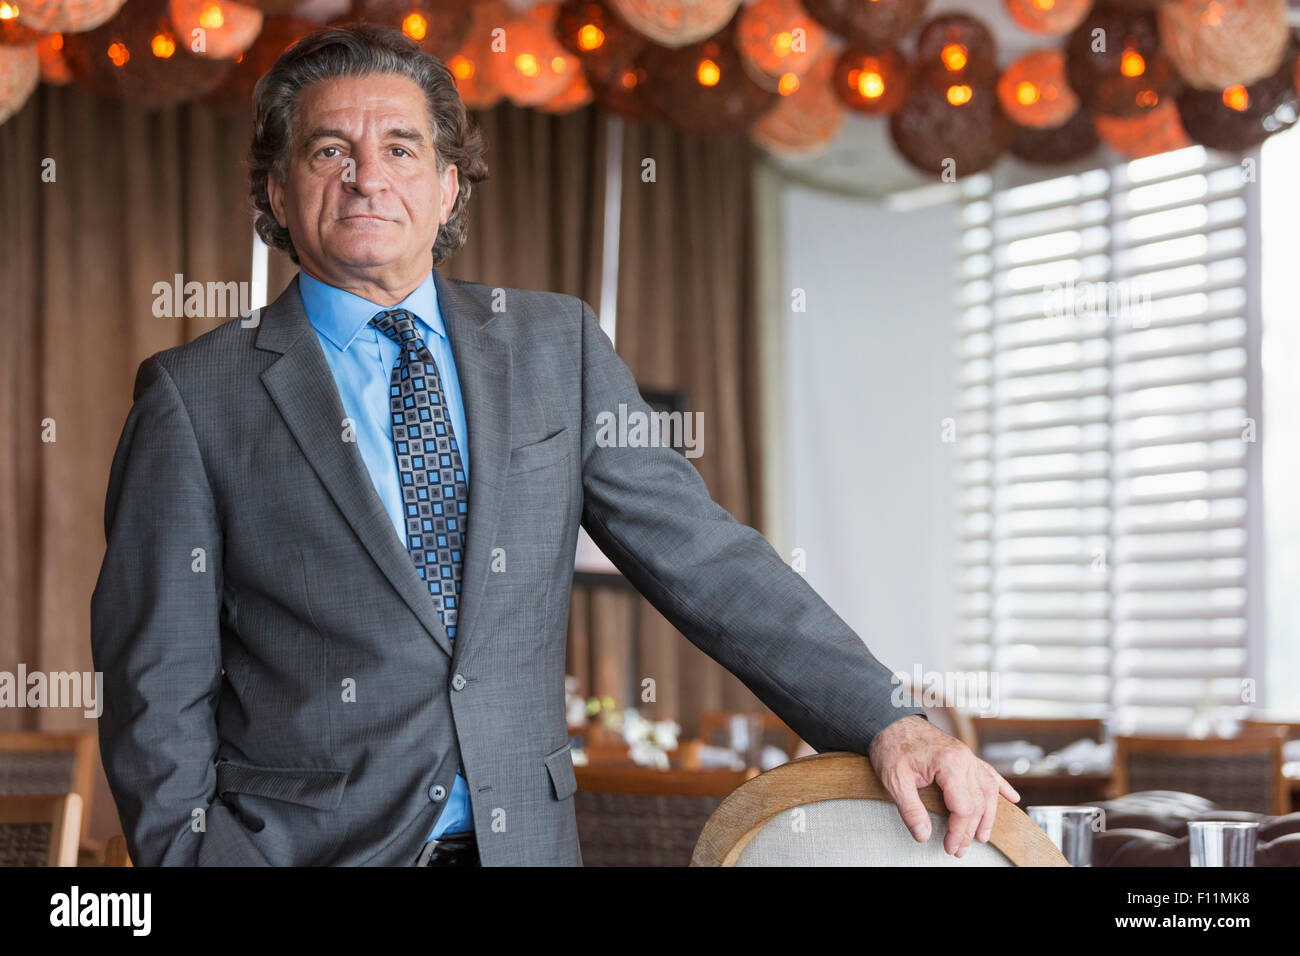 Businessman standing in dining room Banque D'Images